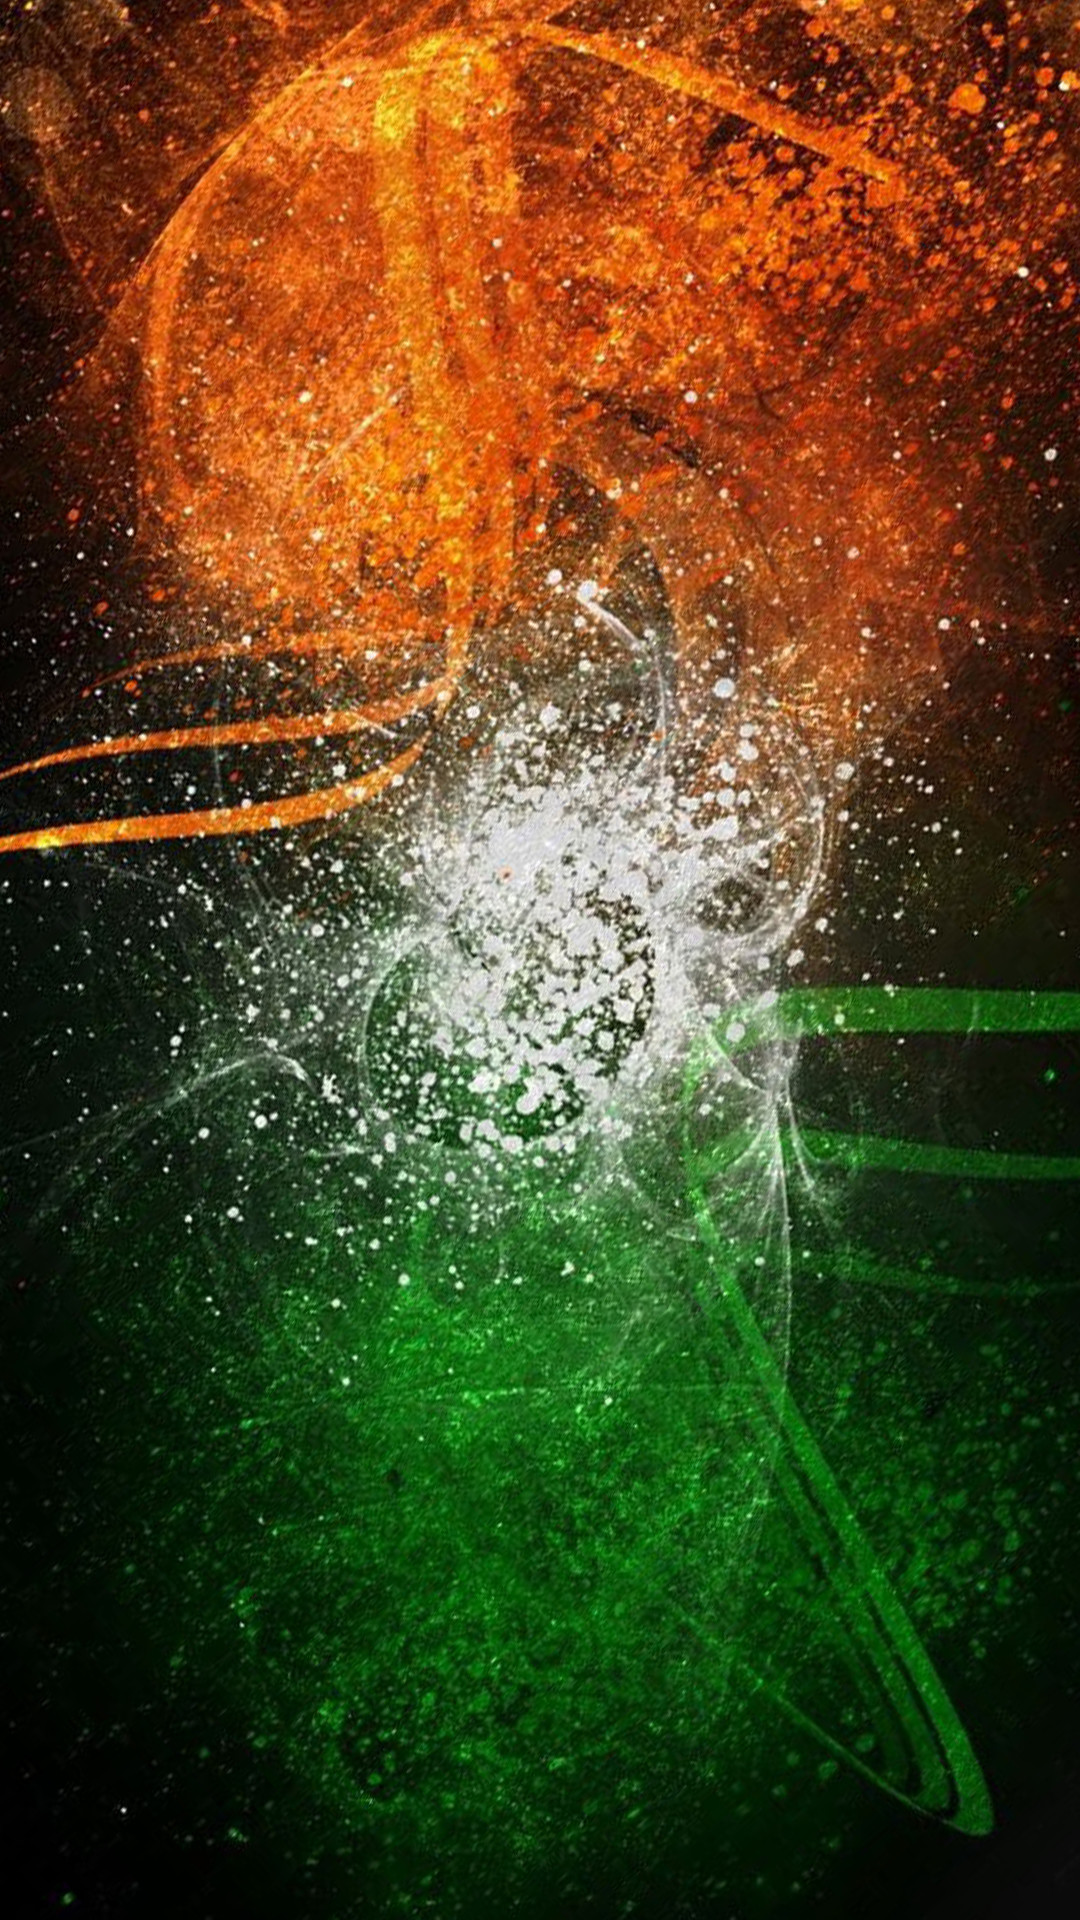 1080x1920 ... Free download of India Flag for Mobile Phone Wallpaper 17 of 17 -  Artistic Tricolor